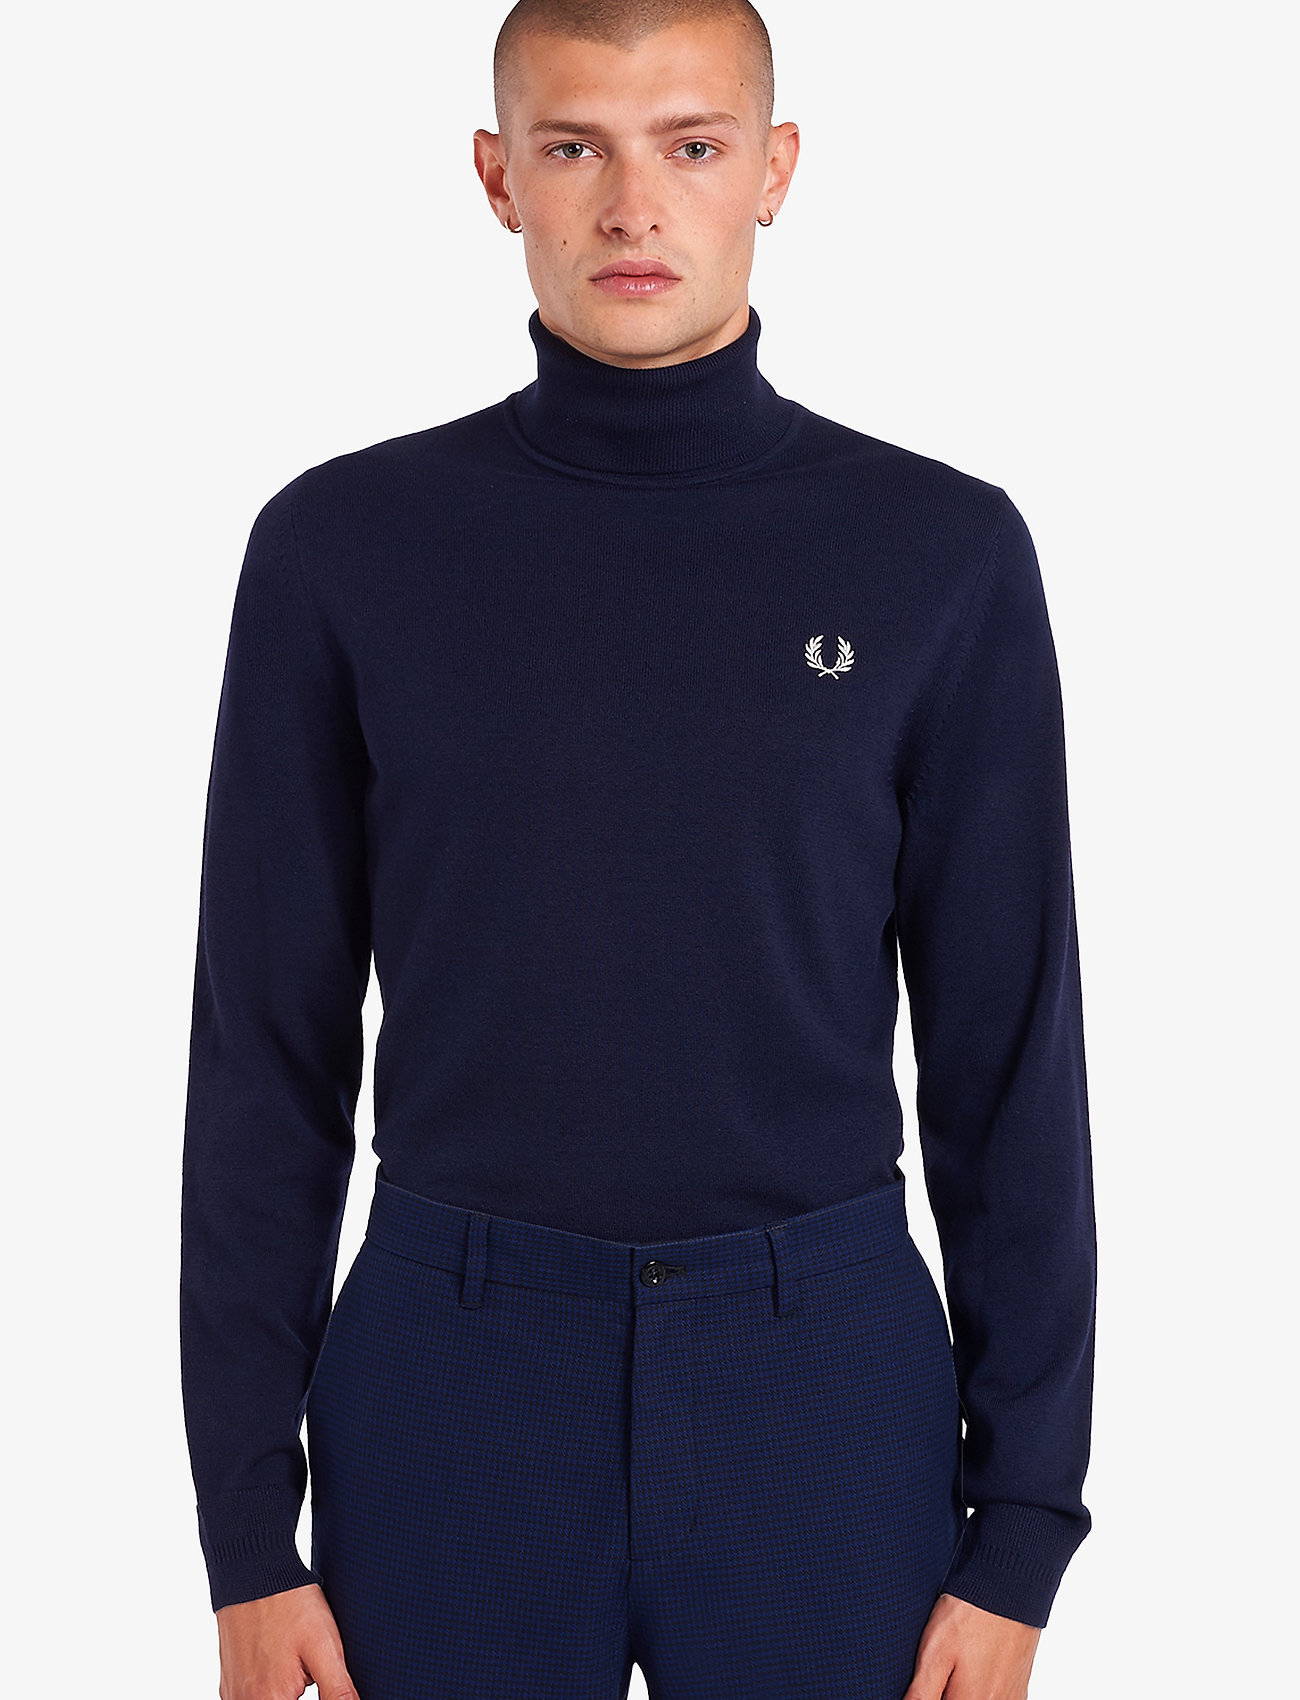 nood Chemicus Roos Fred Perry Roll Neck Jumper - Truien met col haag - Boozt.com